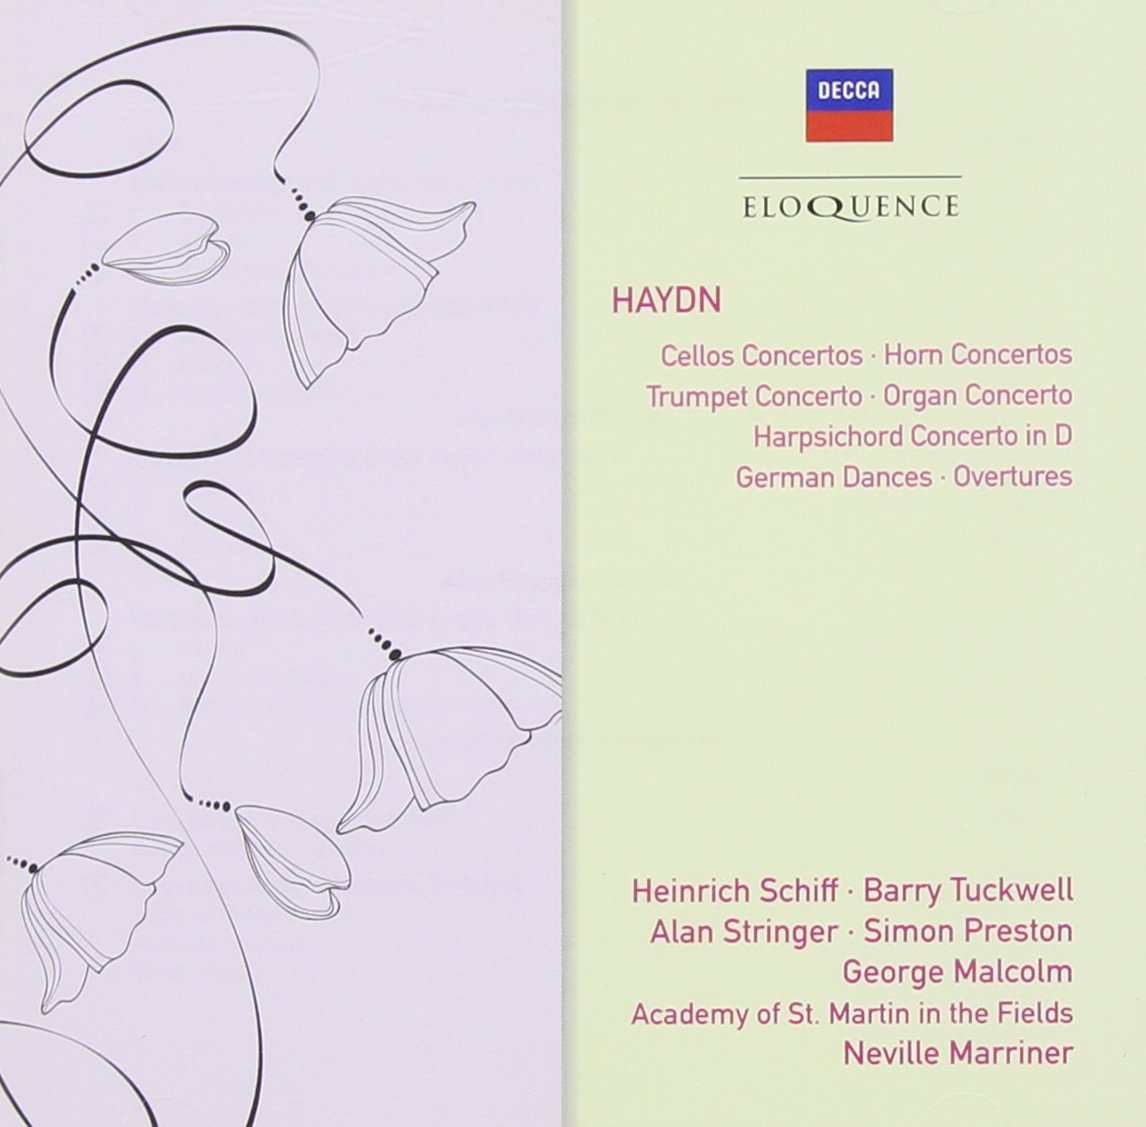 HAYDN: Horn, Cello and Trumpet Concertos, German Dances, Overtures - Academy of St. Martin in the Fields, Marriner (2 CDs)